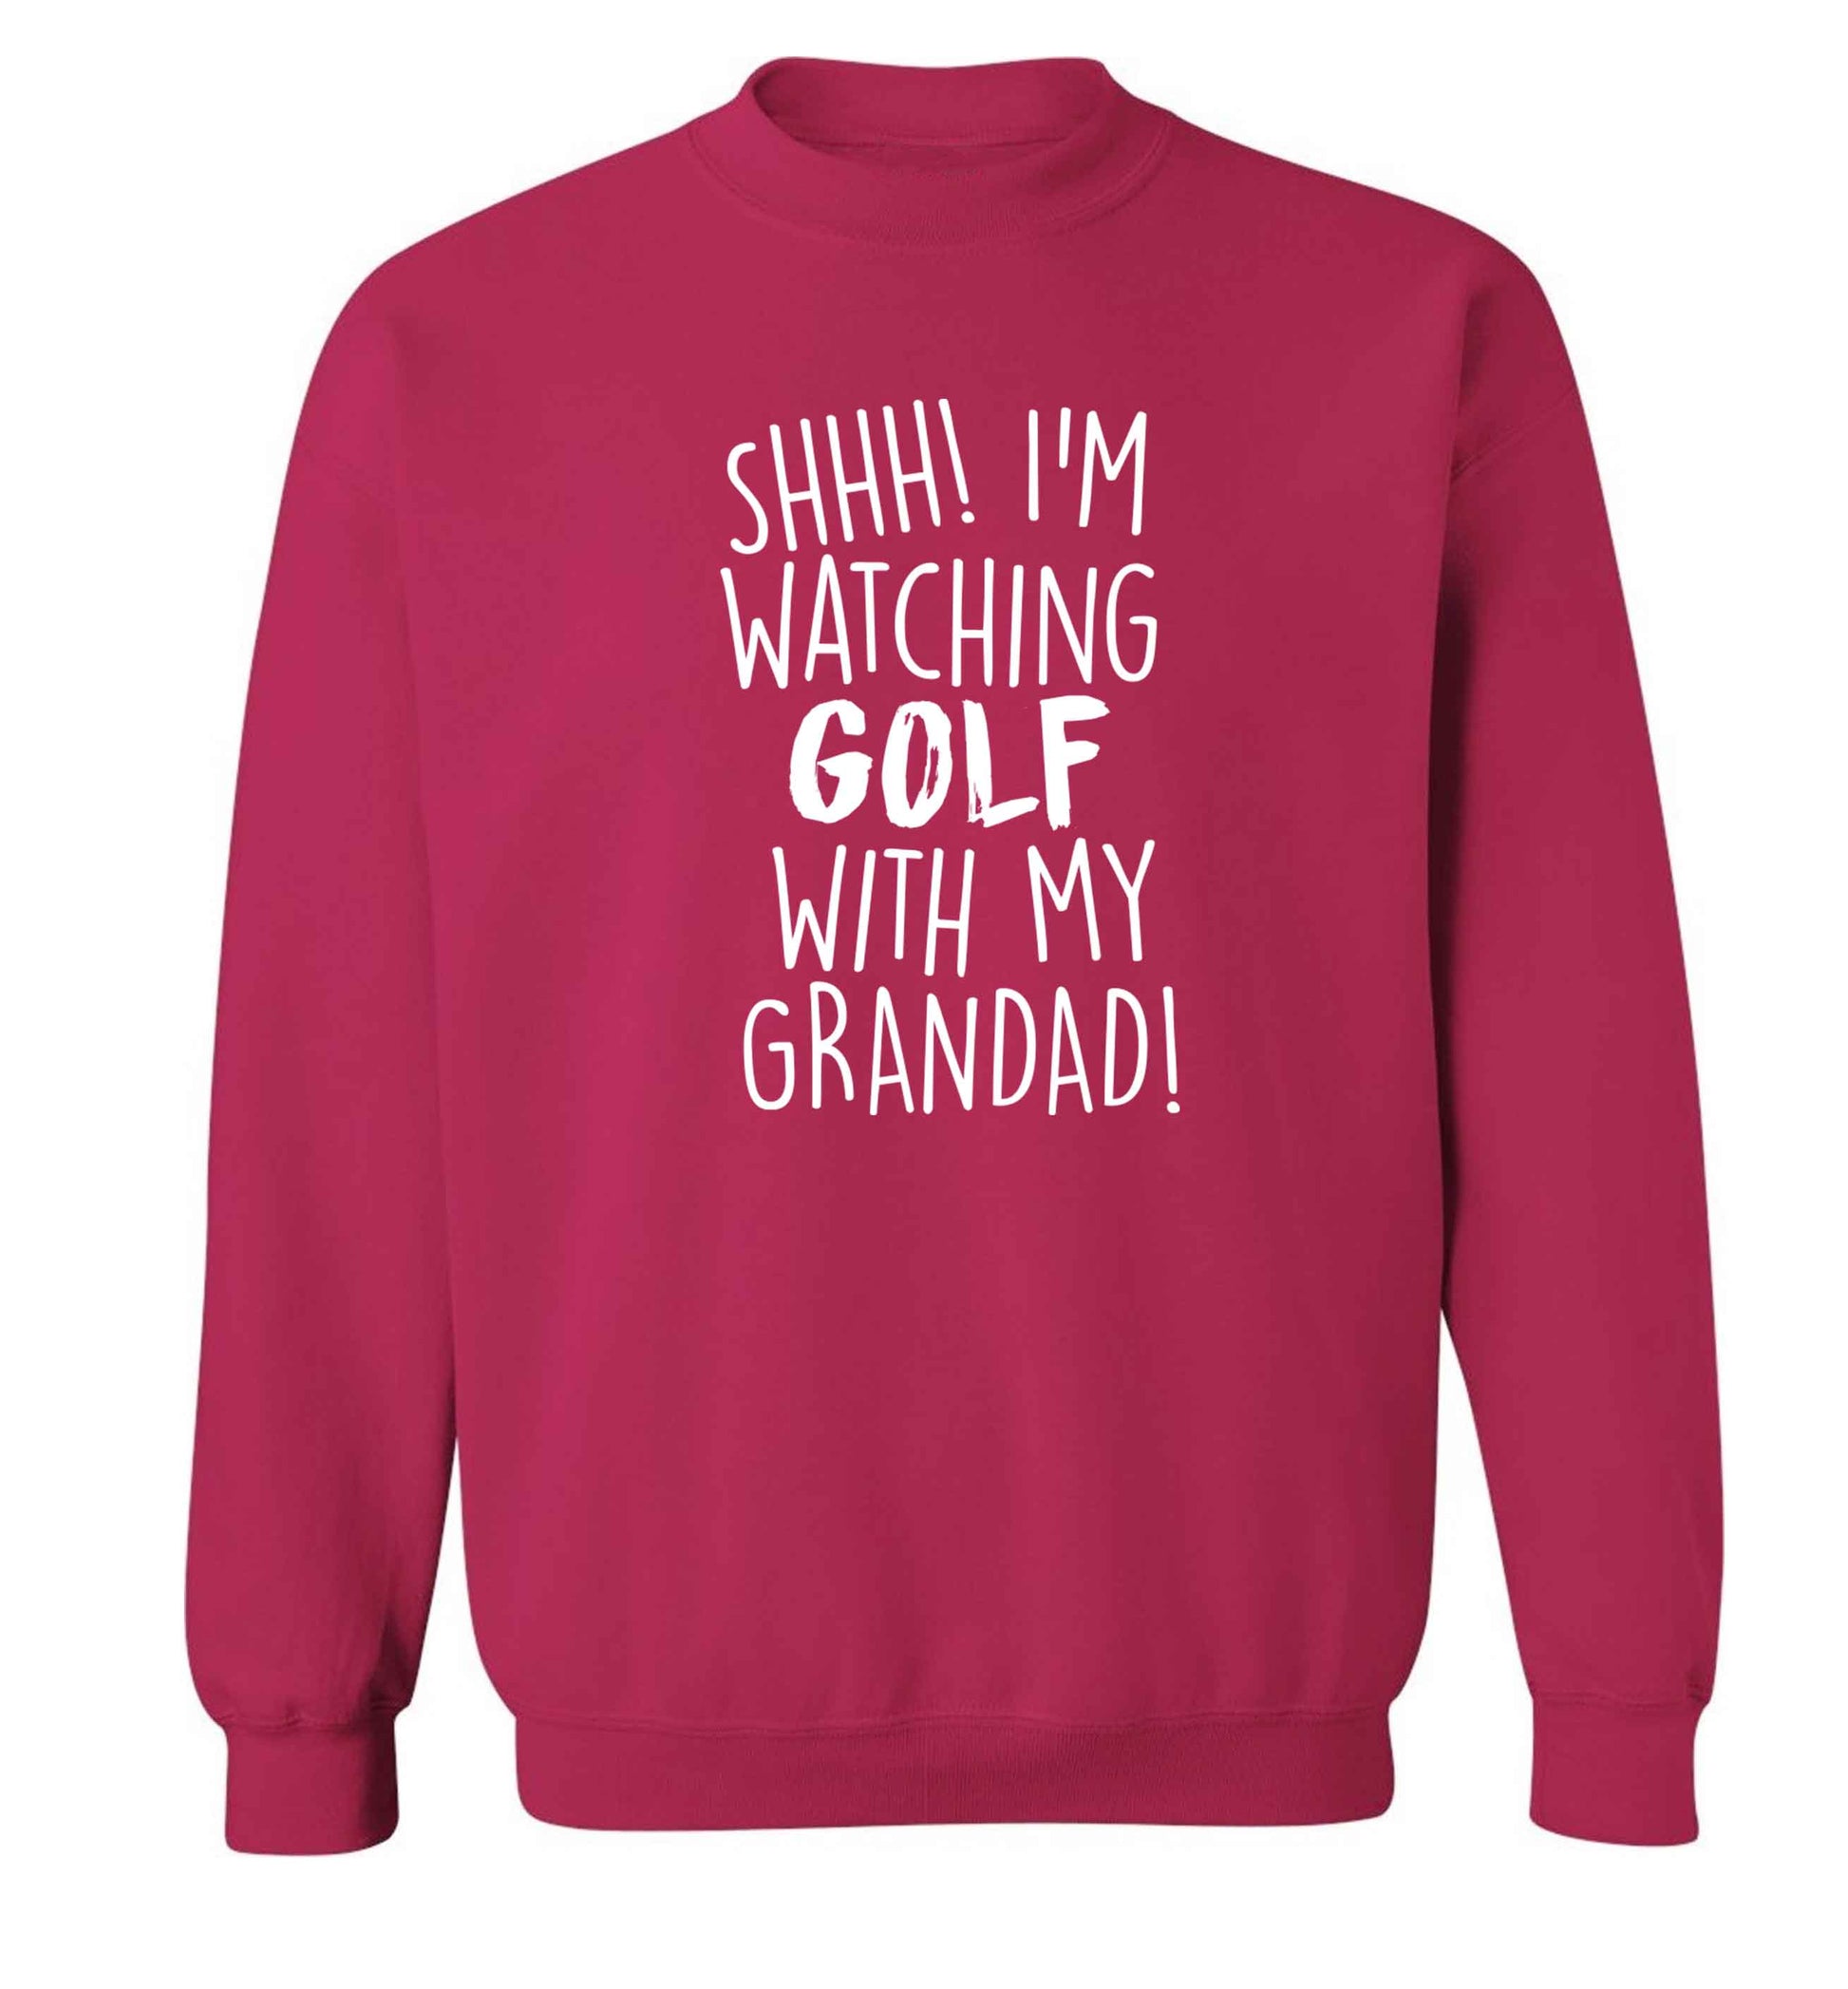 Shh I'm watching golf with my grandad Adult's unisex pink Sweater 2XL